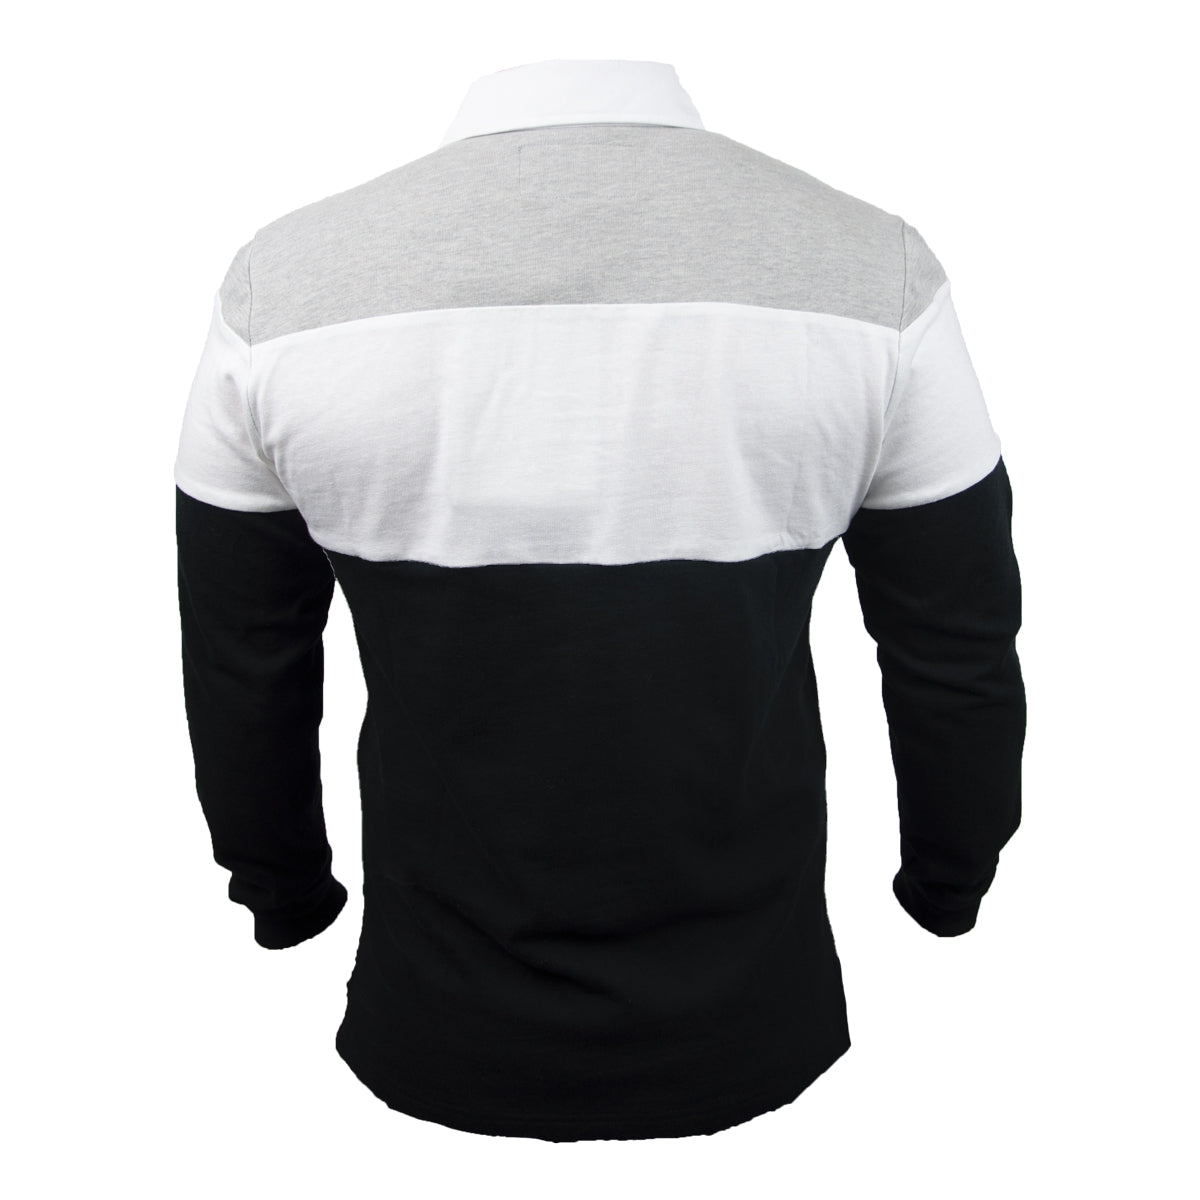 The back view of a Guinness Toucan Rugby Jersey.